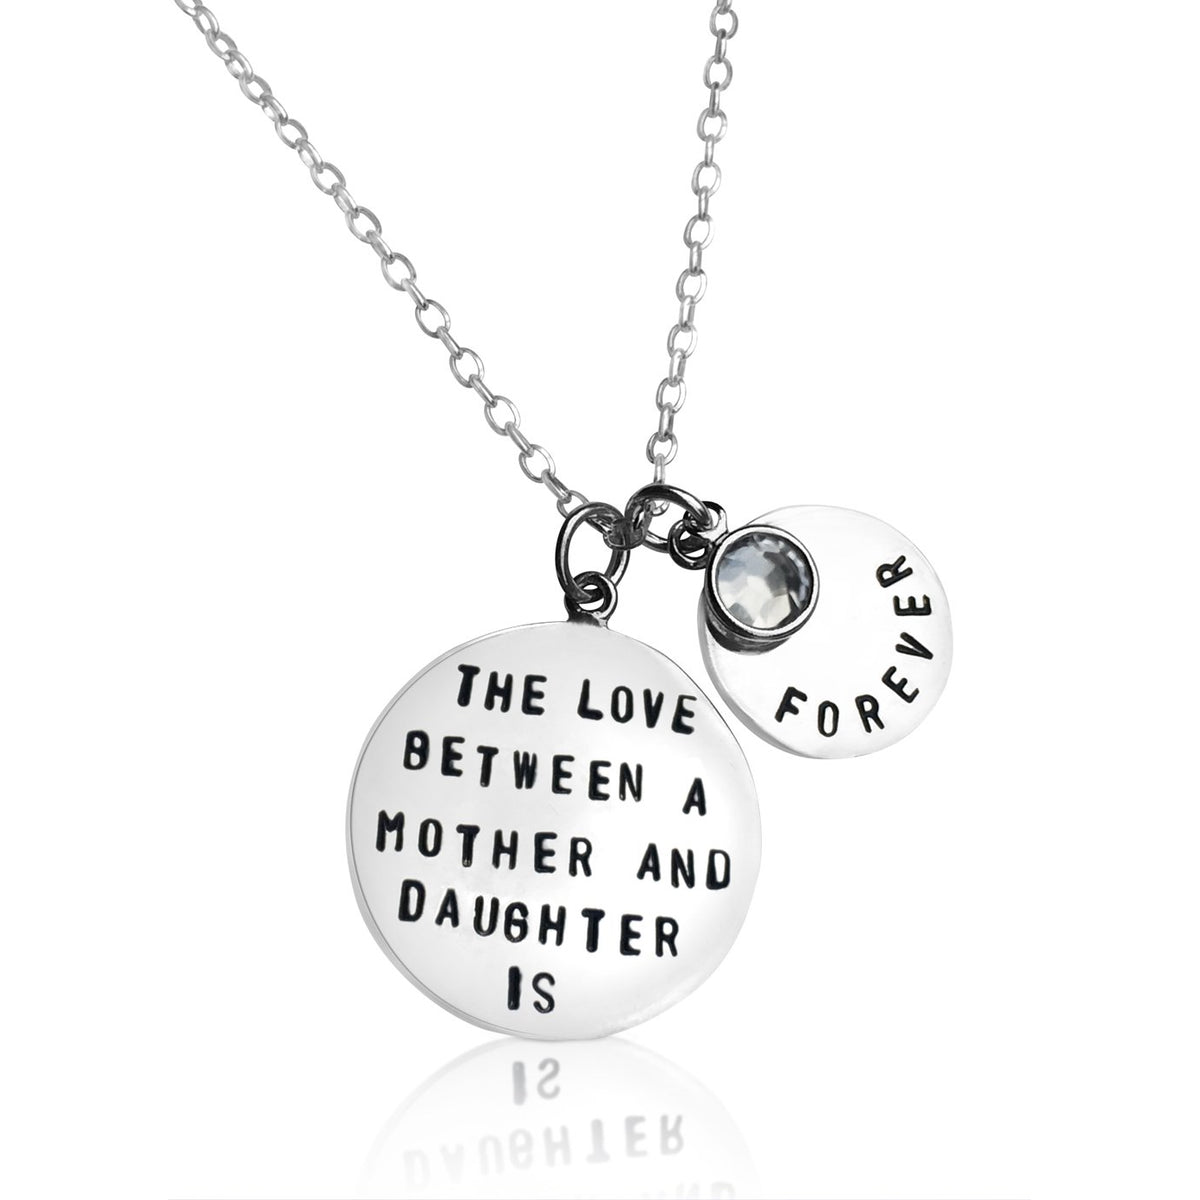 Love Between a Mother and Daughter is Forever Silver Necklace